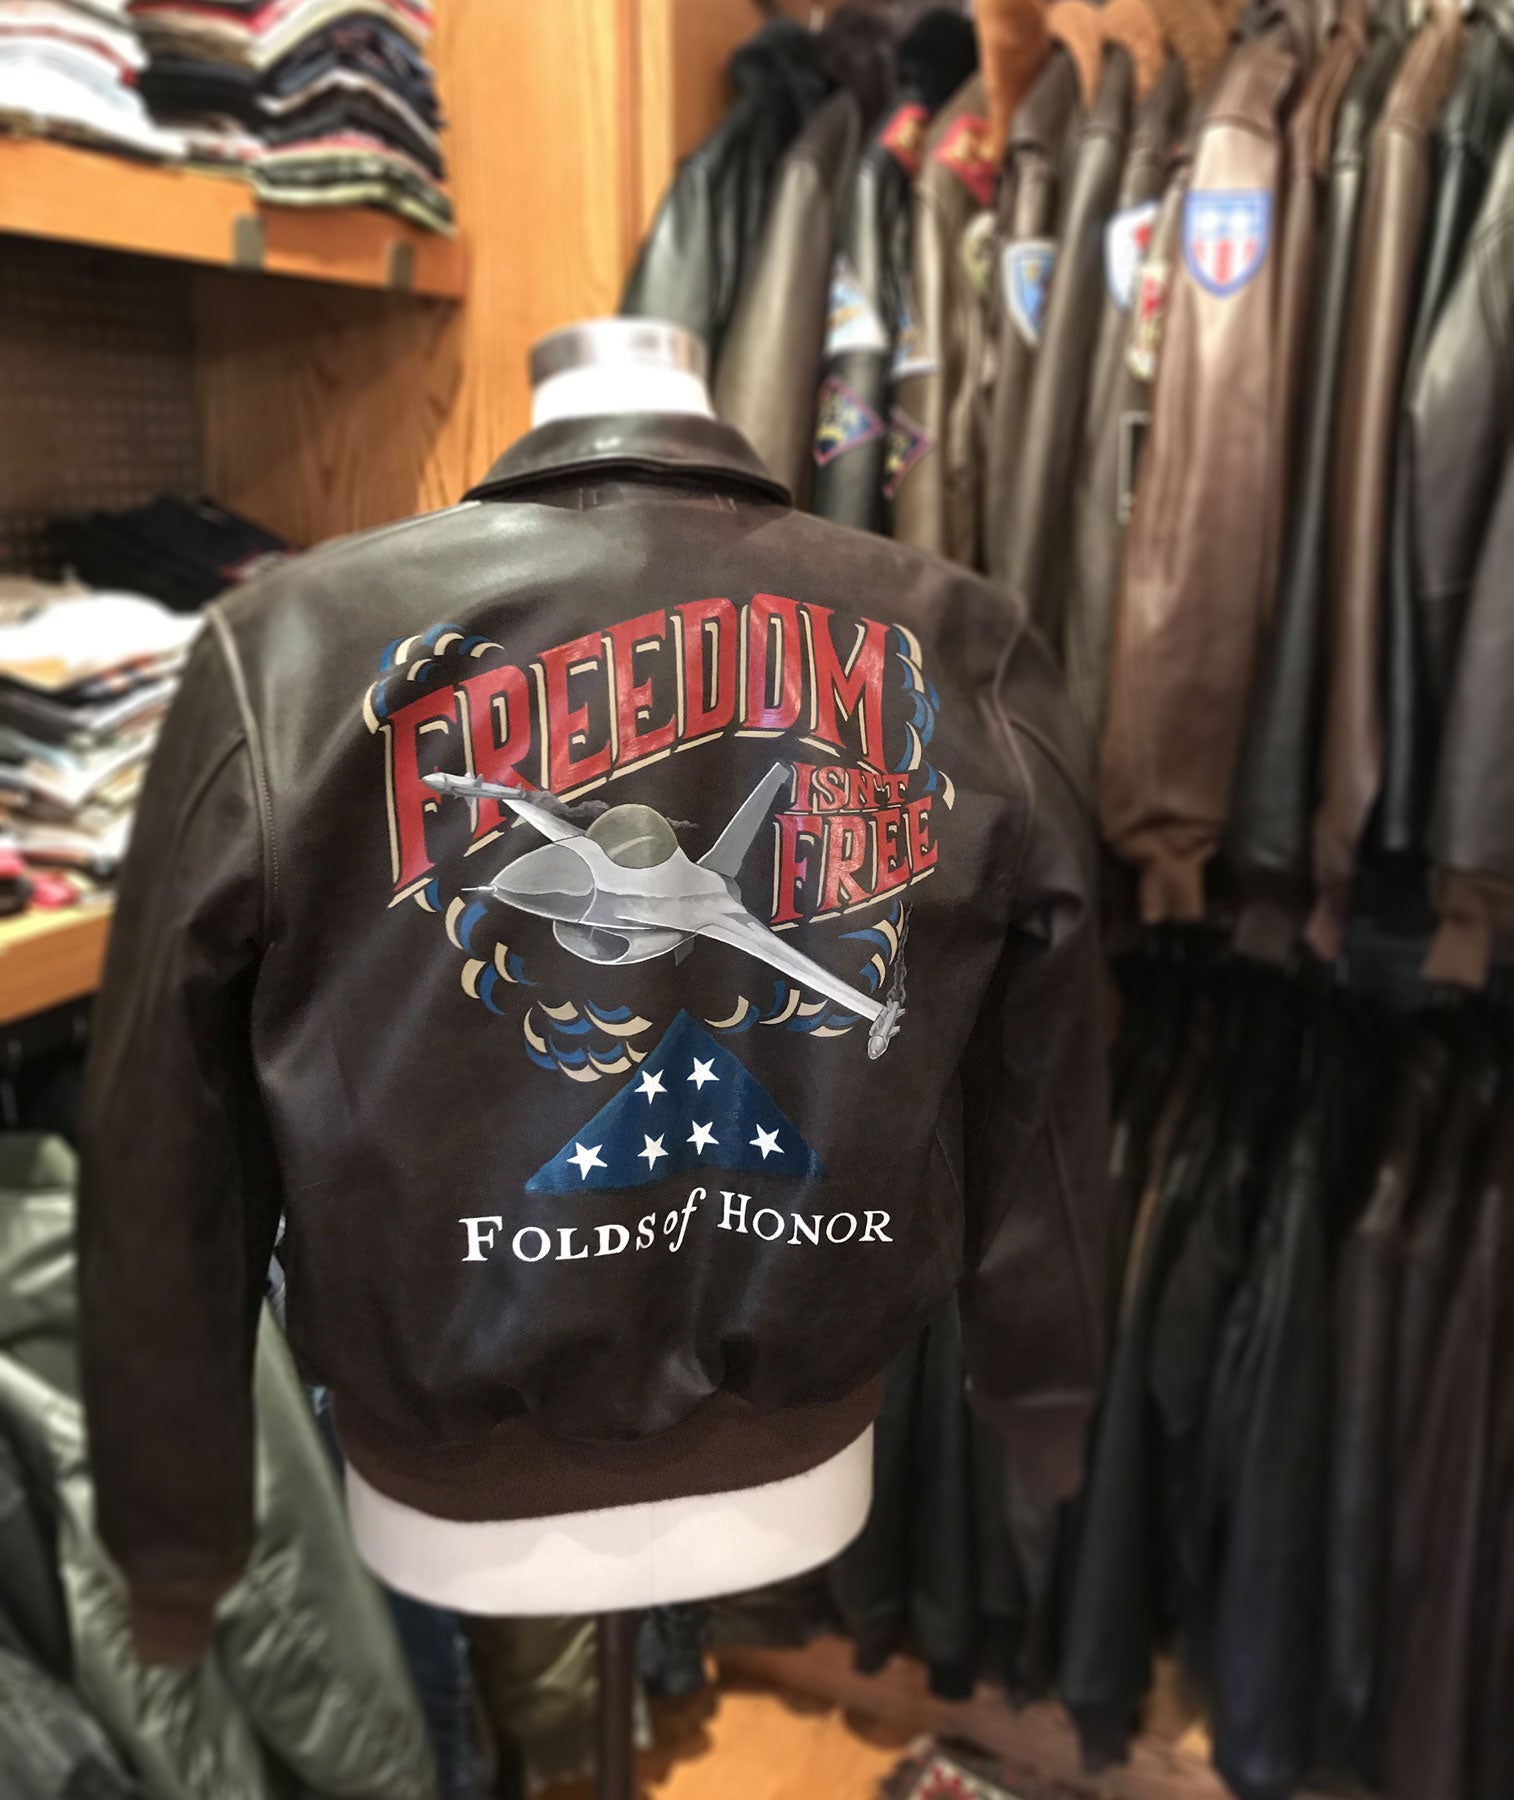 The finished hand painted Folds of Honor/Cockpit USA “Freedom isn’t Free” A-2 leather flight jacket